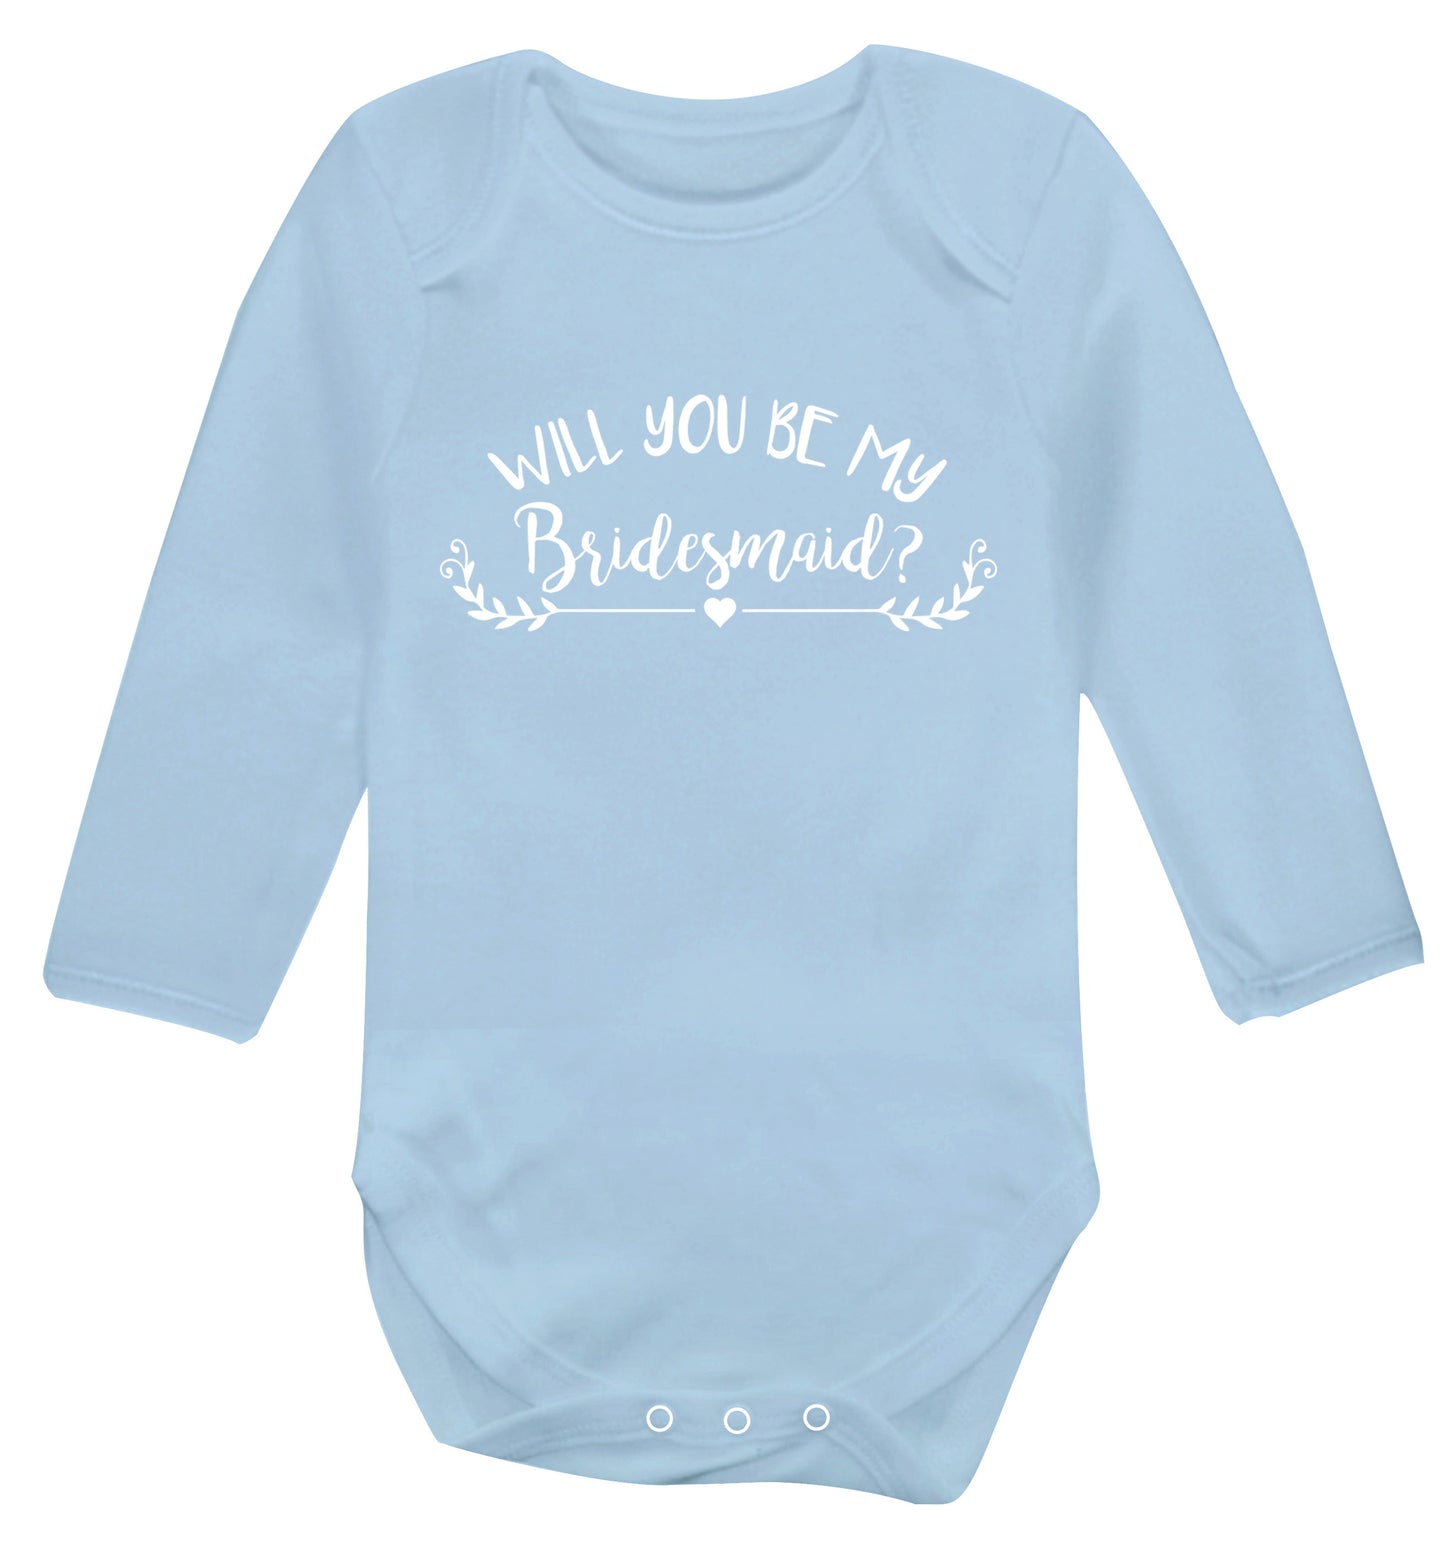 Will you be my bridesmaid? Baby Vest long sleeved pale blue 6-12 months